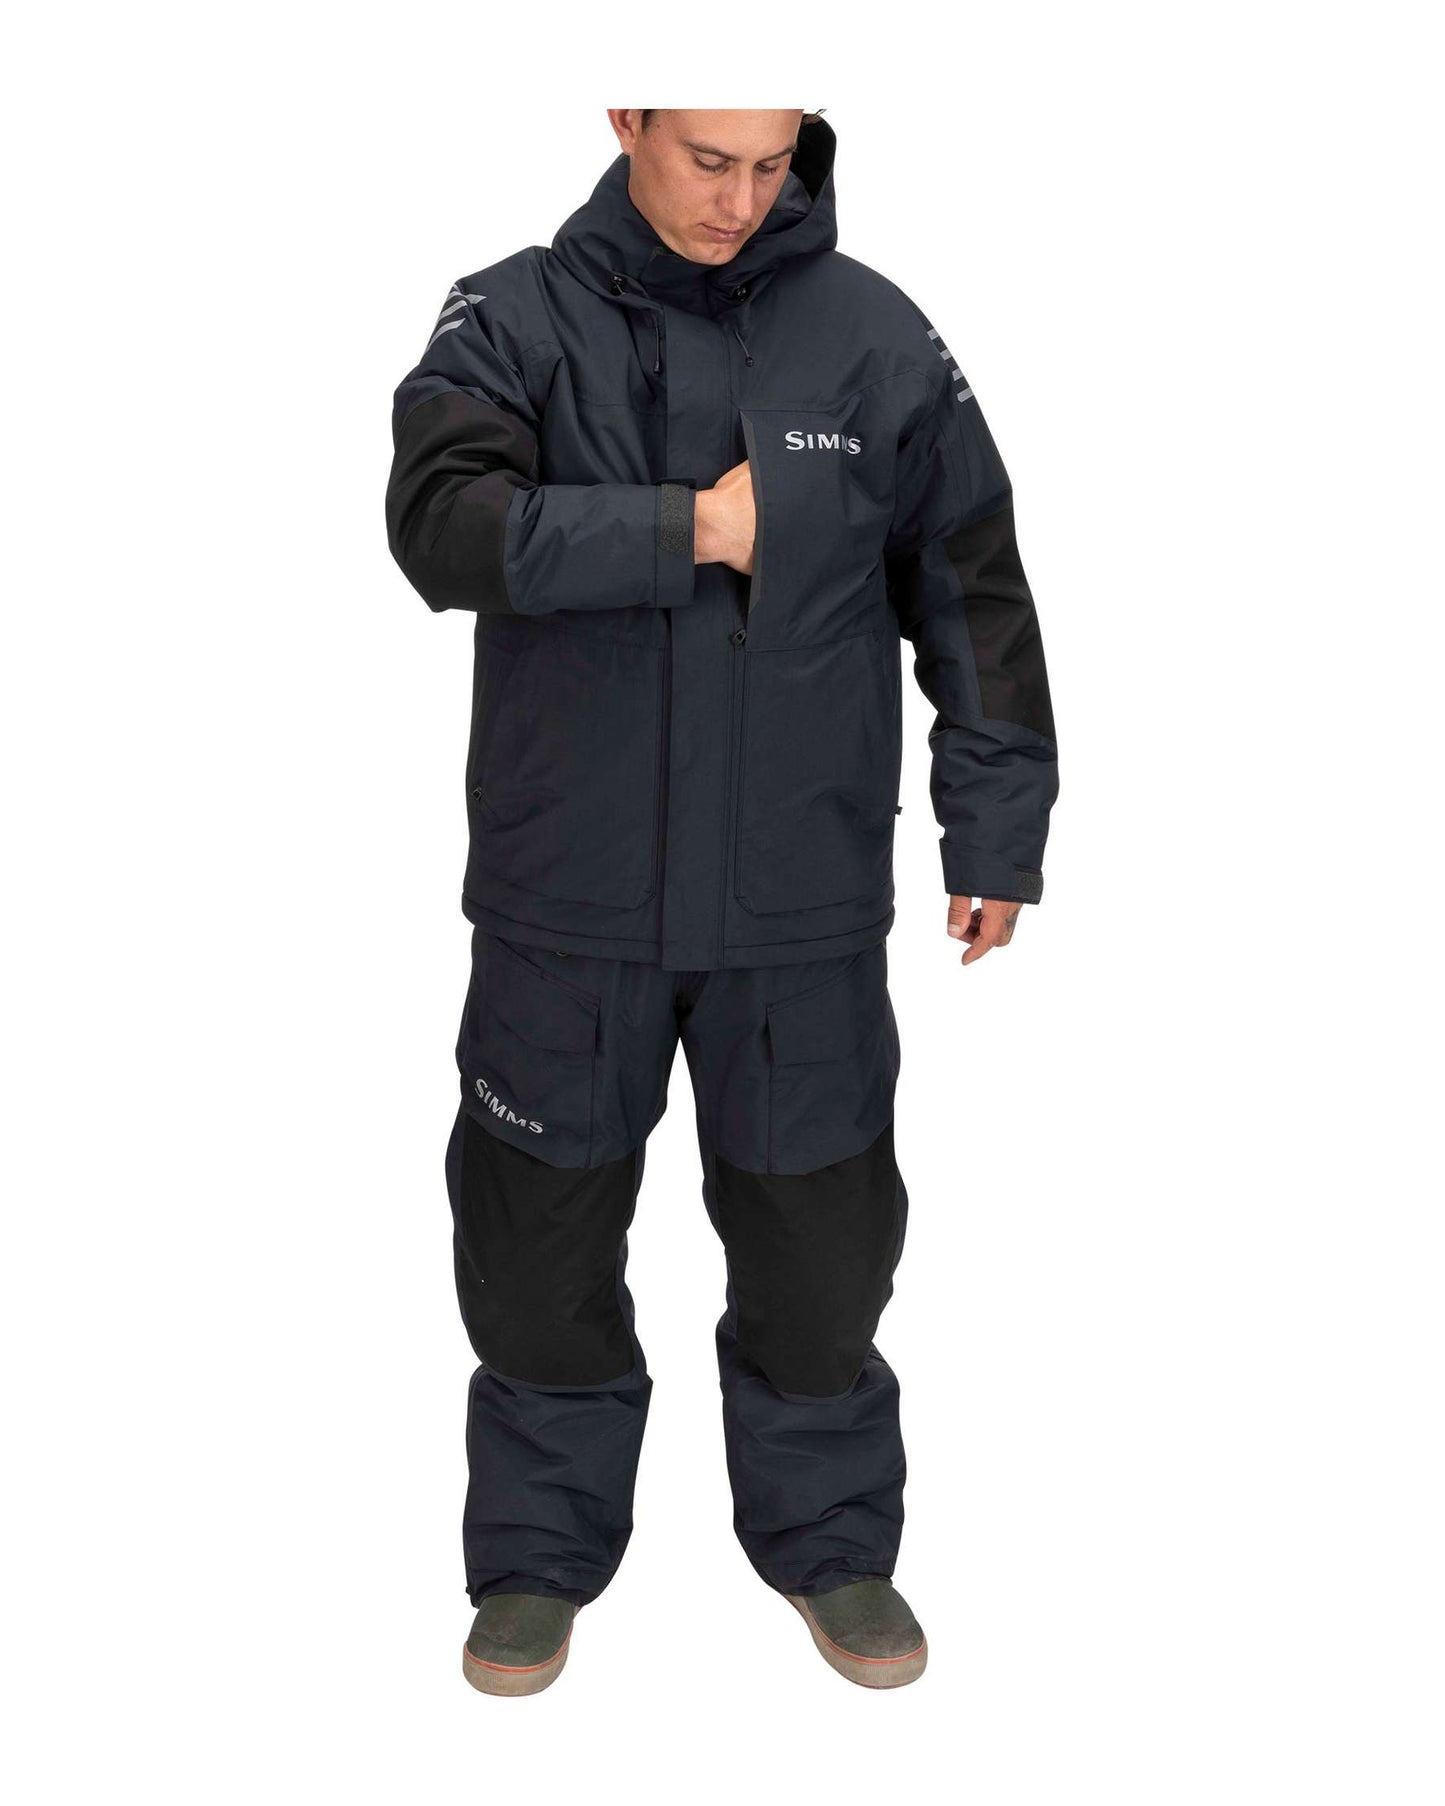 13050-001-ms-challenger-insulated-jacket-black-onbody